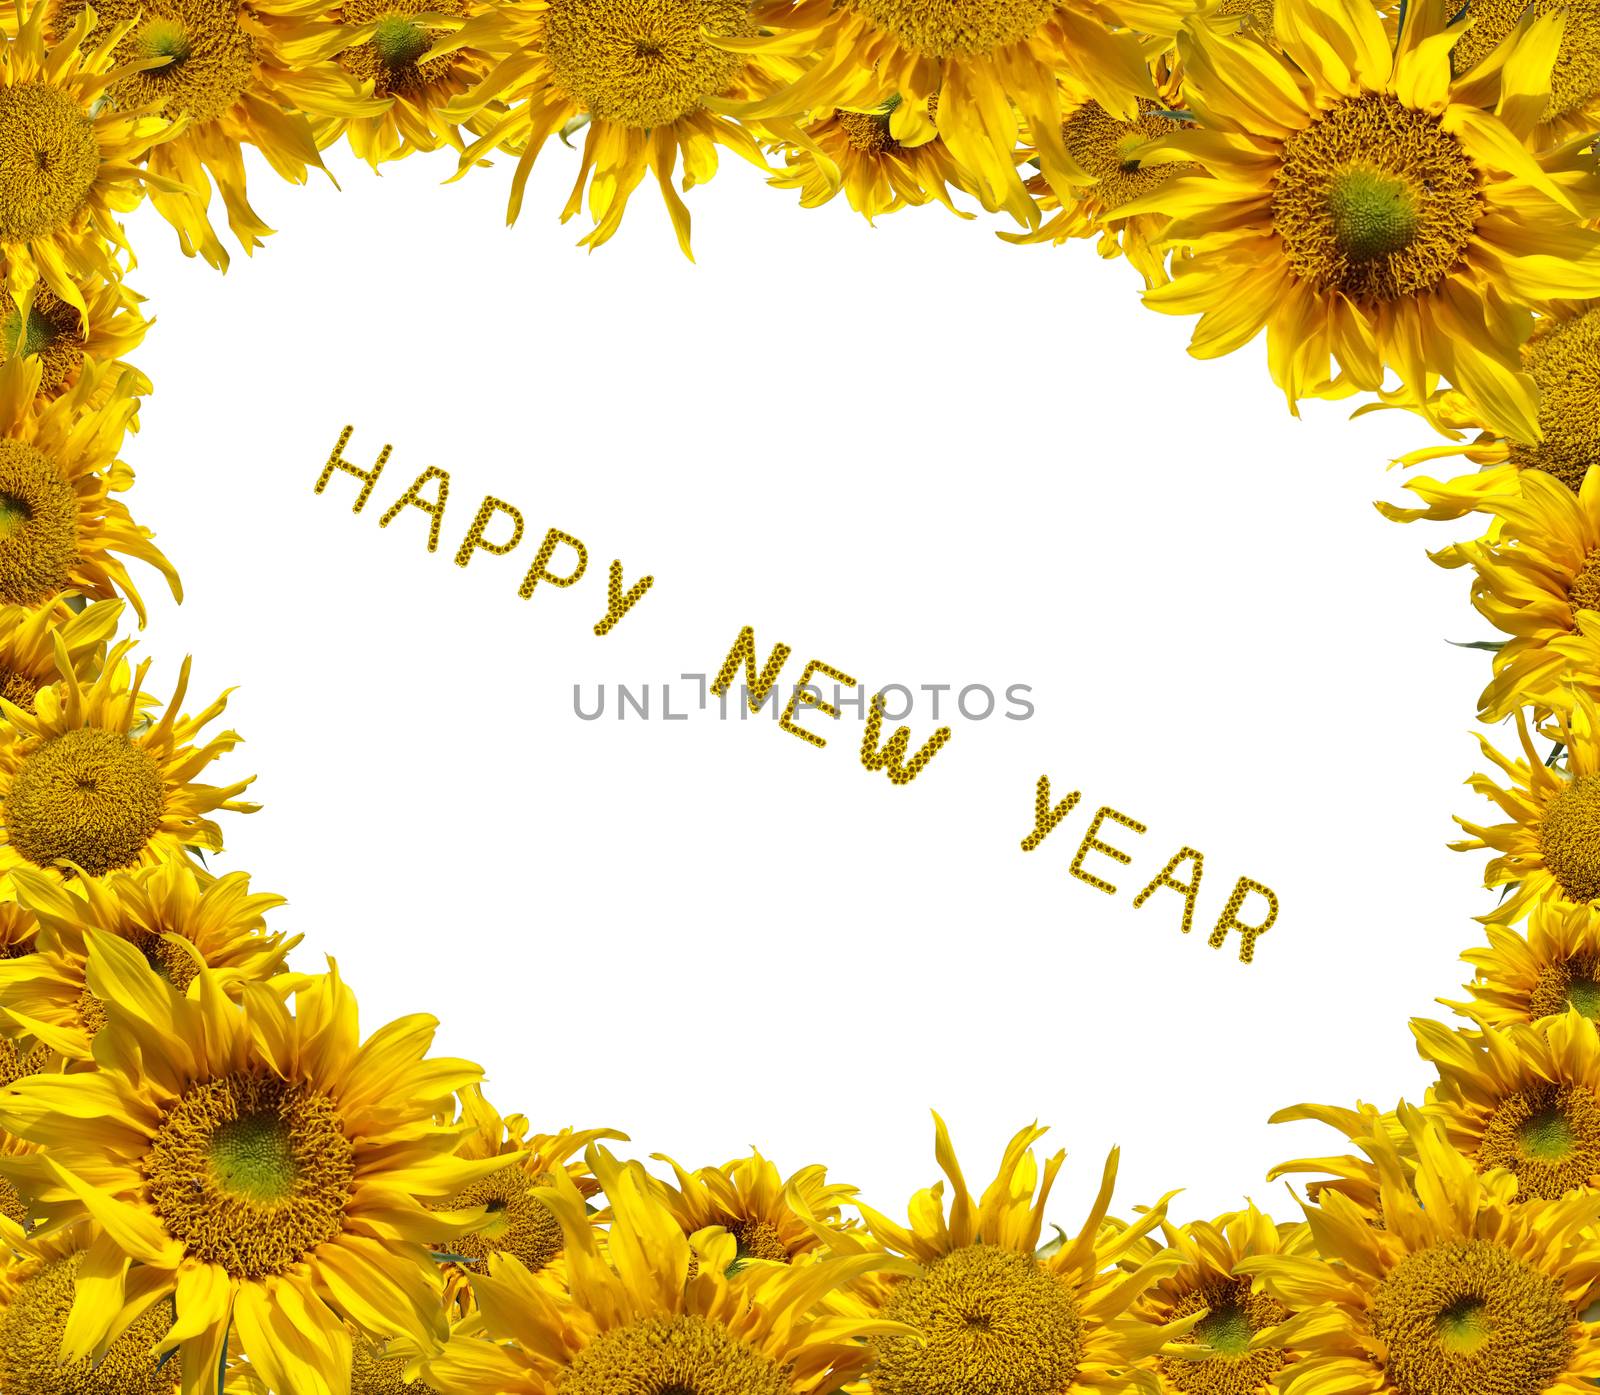 Beautiful frame of colorful sunflowers with sunflower letter arrange in the words Happy New Year, clipping path included. 